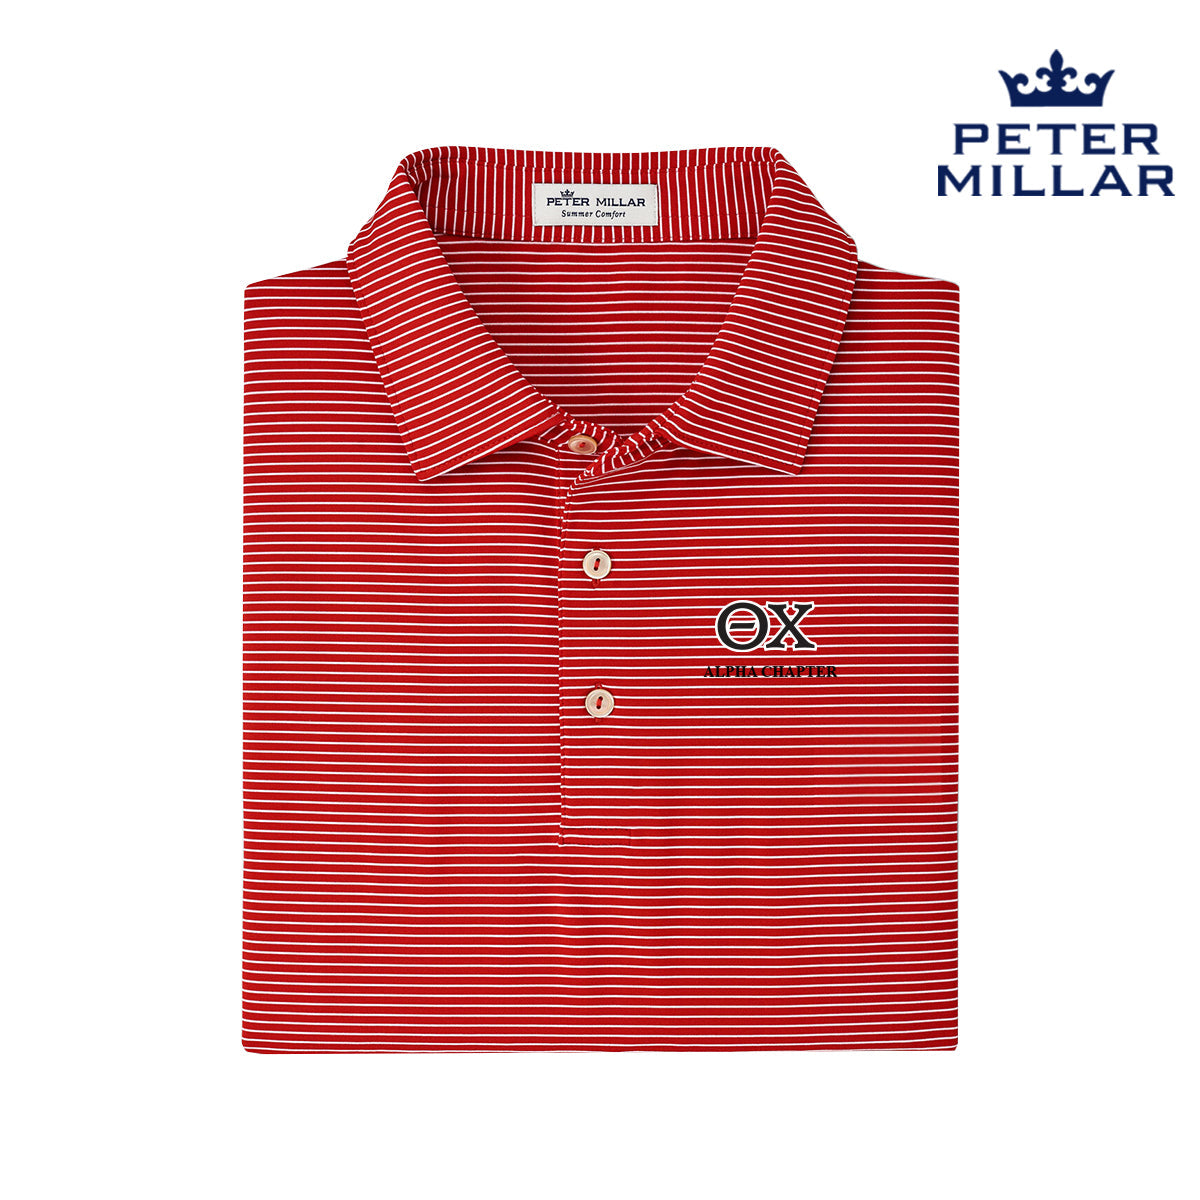 Theta Chi Personalized Red Peter Millar Marlin Performance Polo With Greek Letters